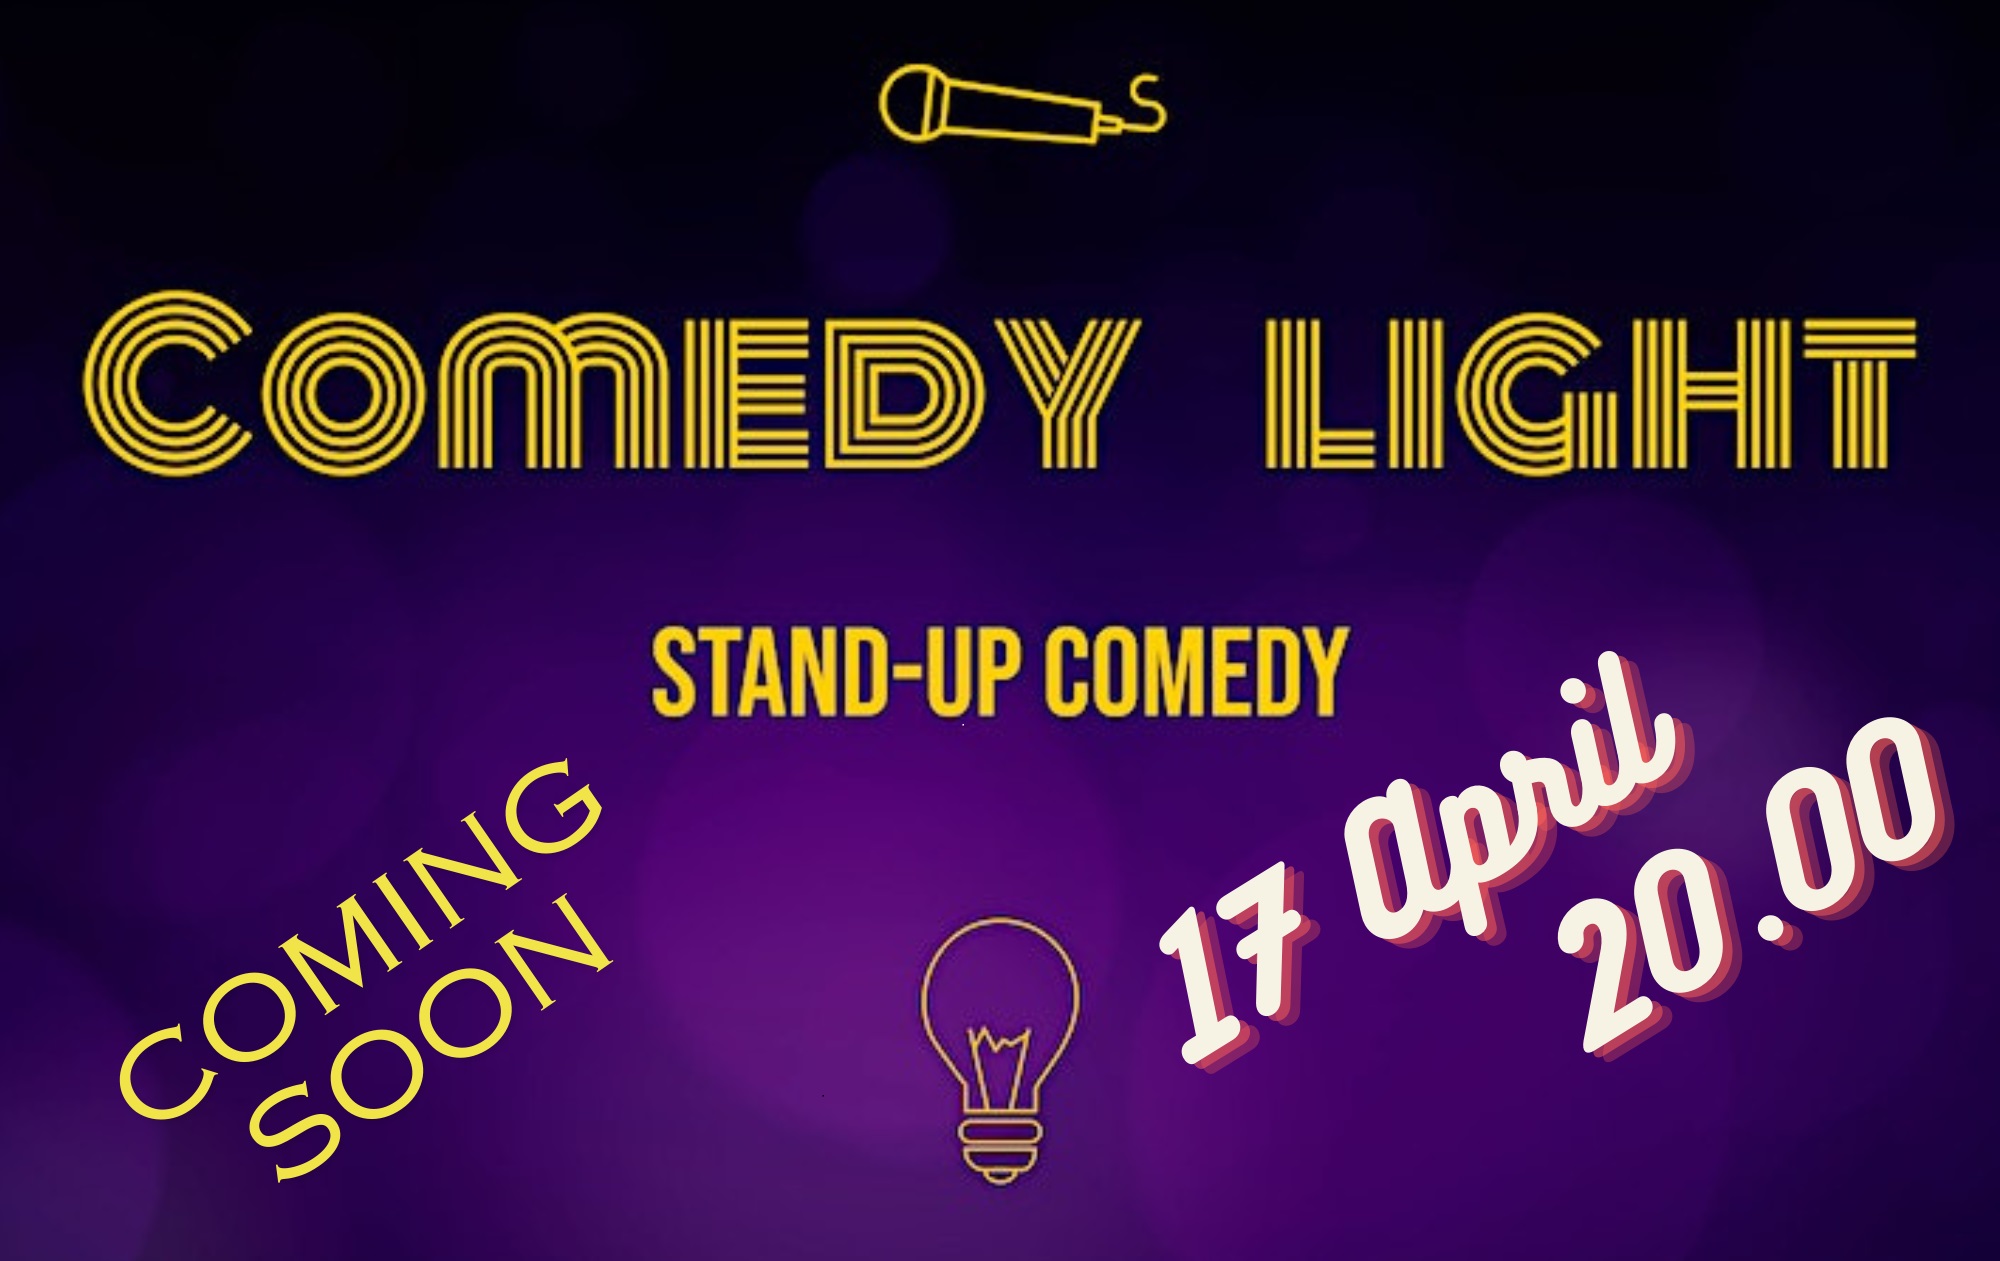 Comedy Night at The Londoner